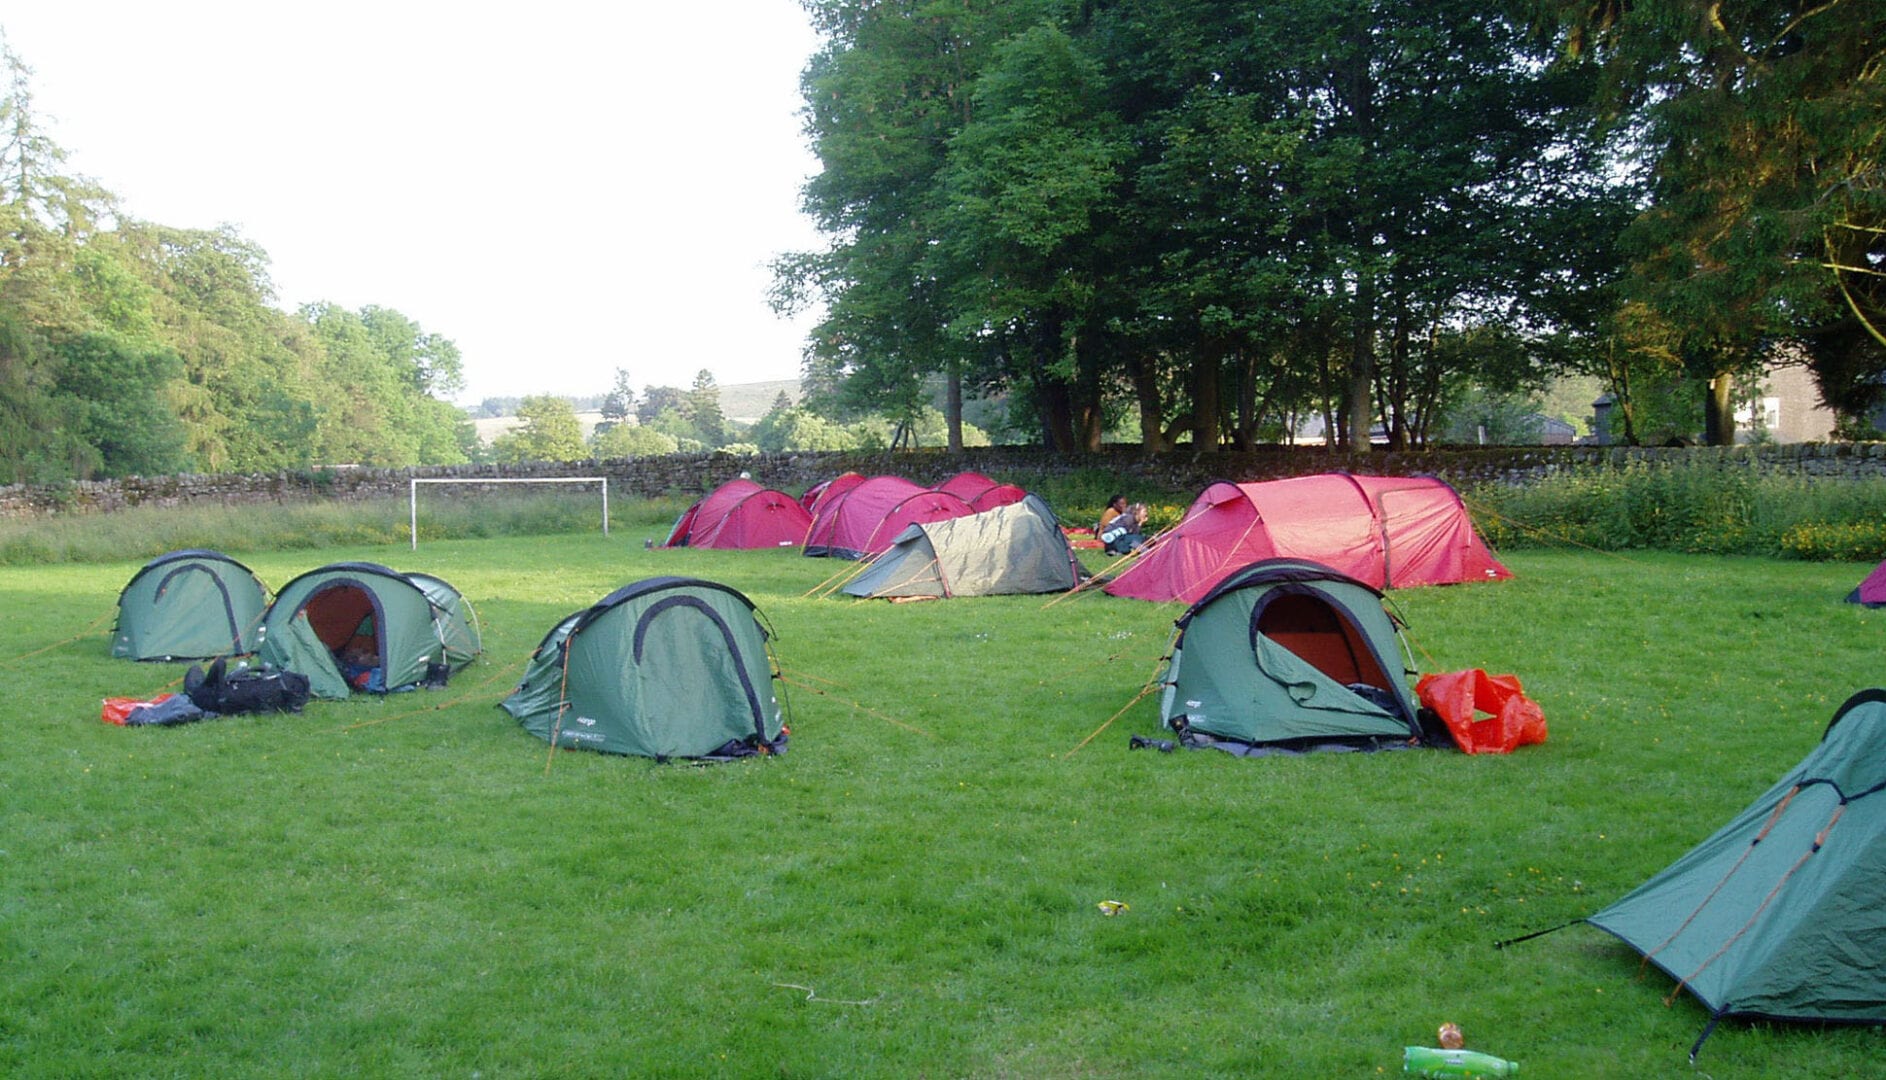 D of E Campsite in the Lake District at Garragil